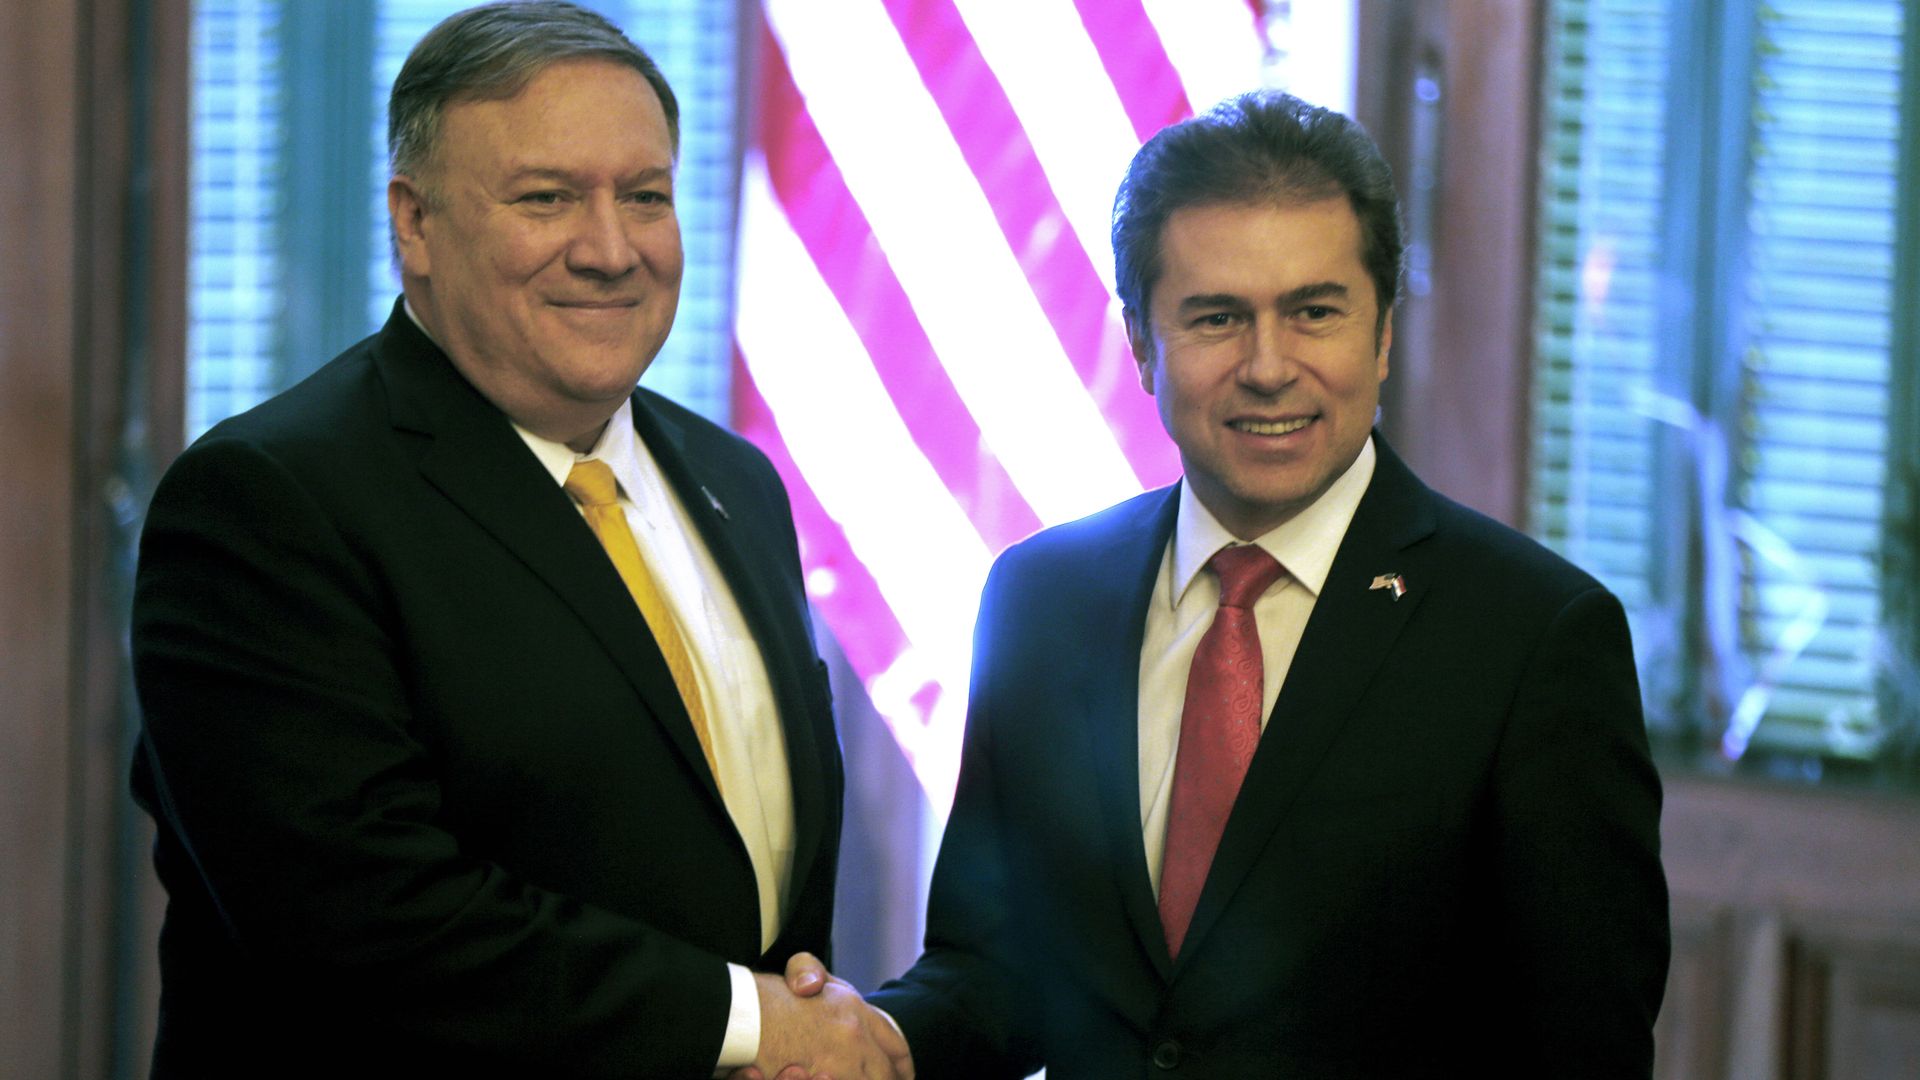 Mike Pompeo shaking hands with Paraguay's foreign minister